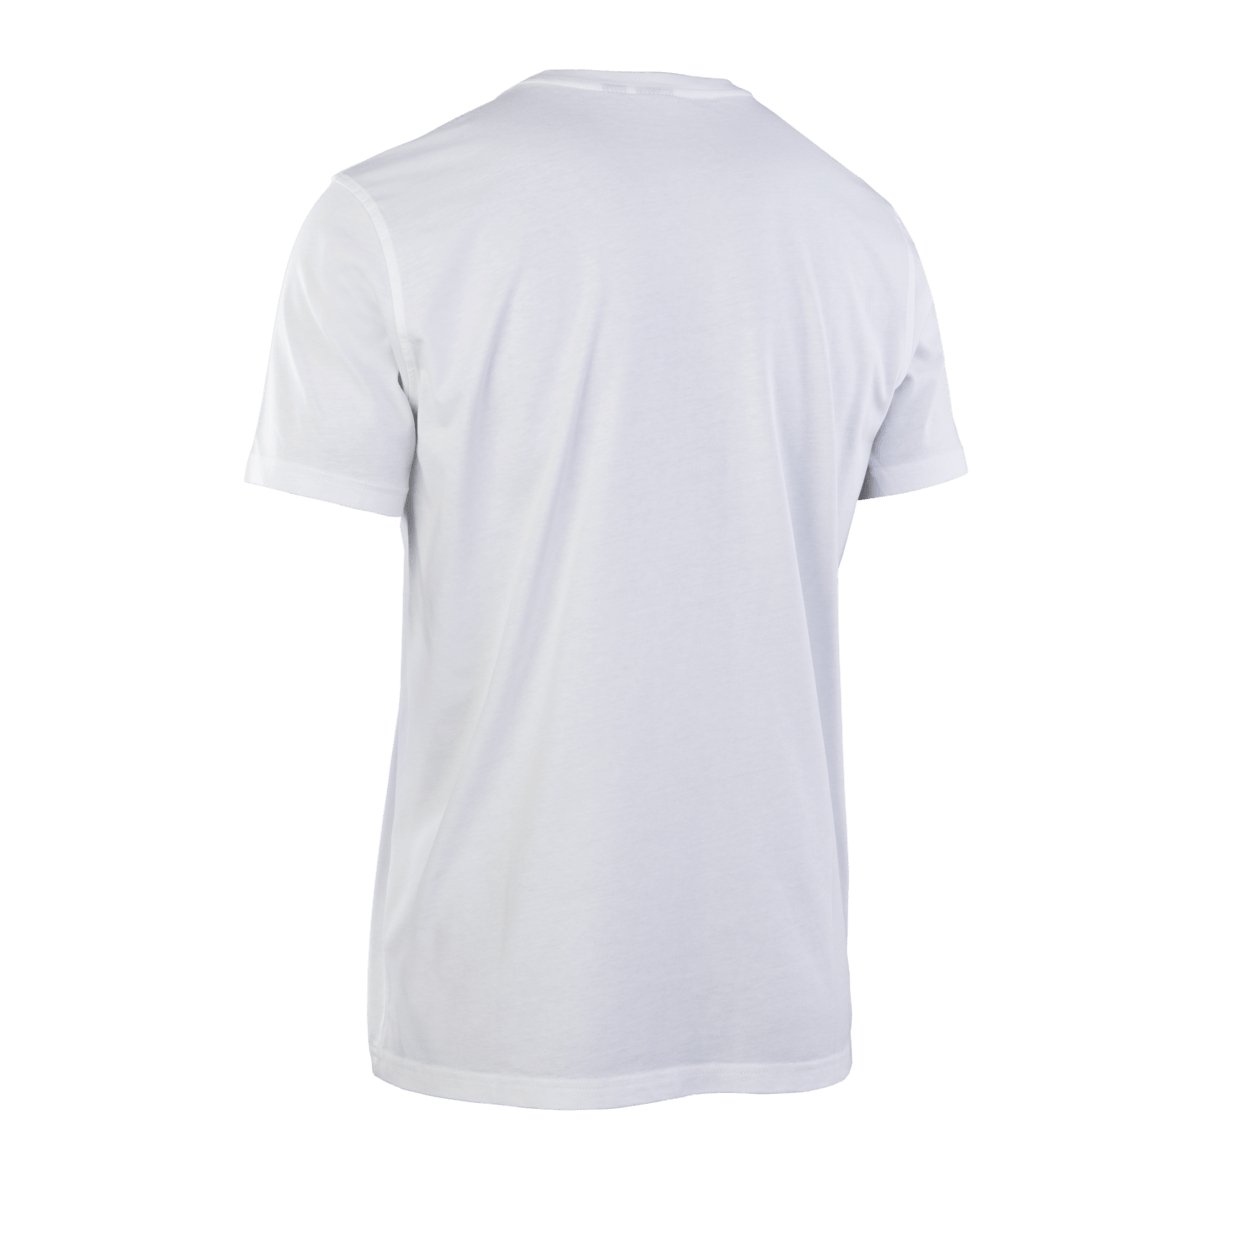 ION Tee Vibes SS men 2024 - Worthing Watersports - 9010583162447 - Apparel - ION Bike